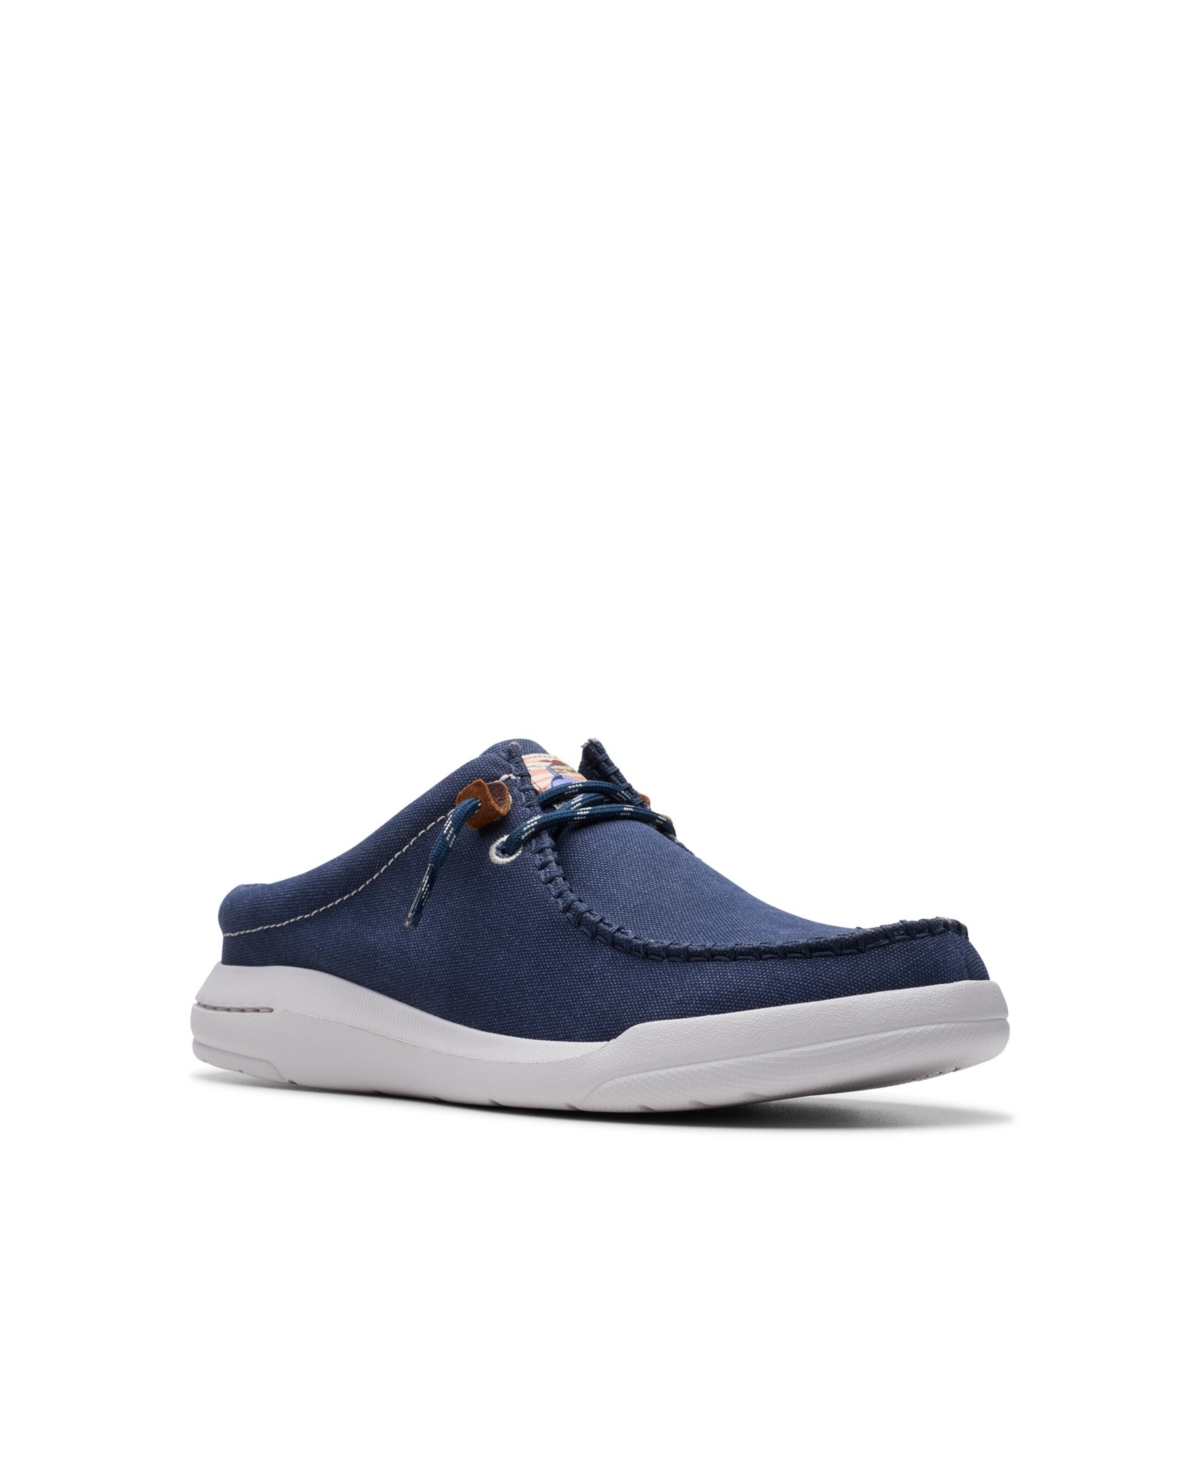 Men's Collection Driftlite Surf Slip On Shoes - Navy Canvas